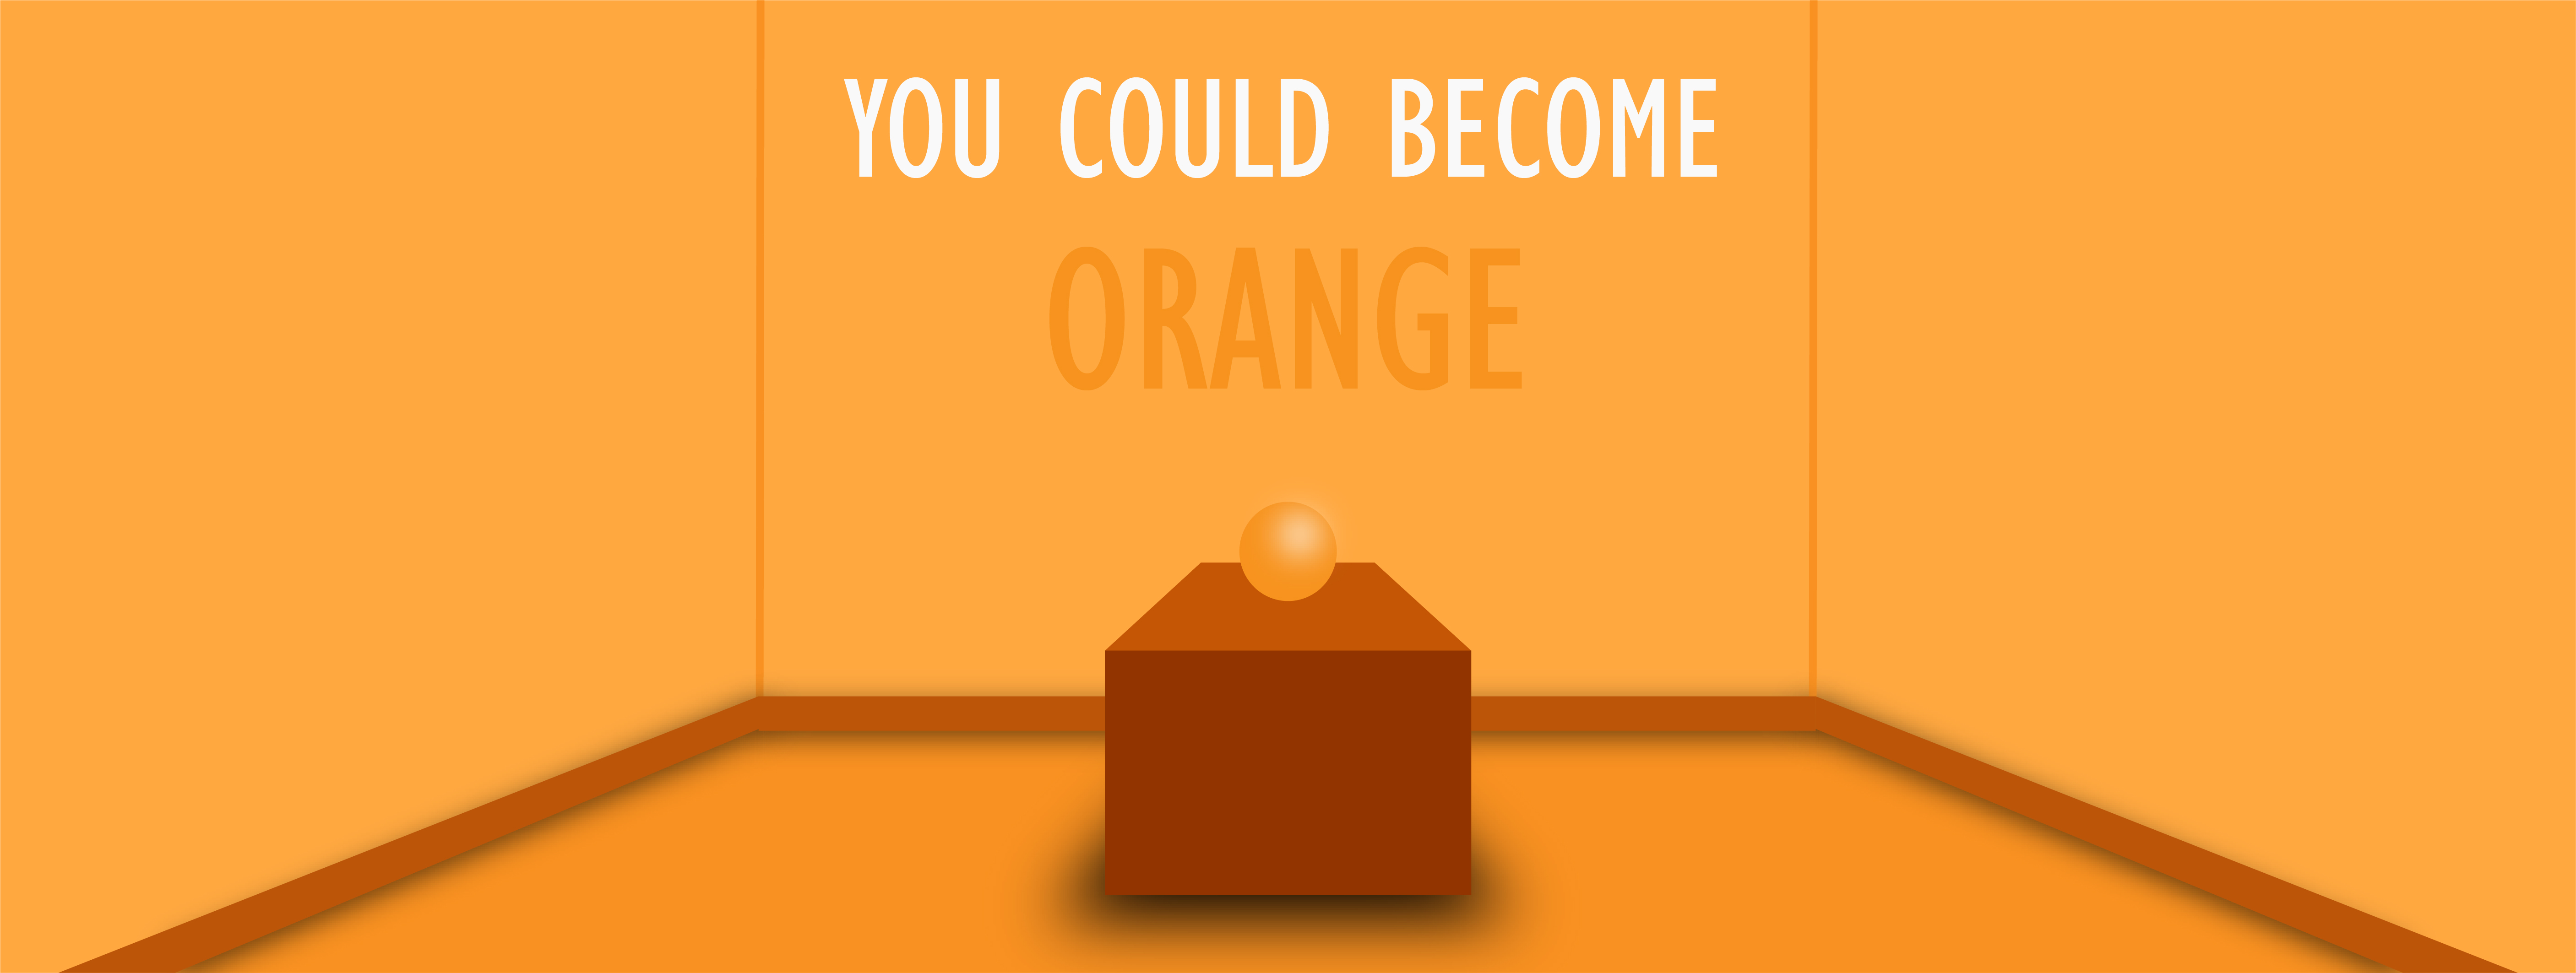 Orange room. Text on wall reads 'YOU COULD BECOME ORANGE’.